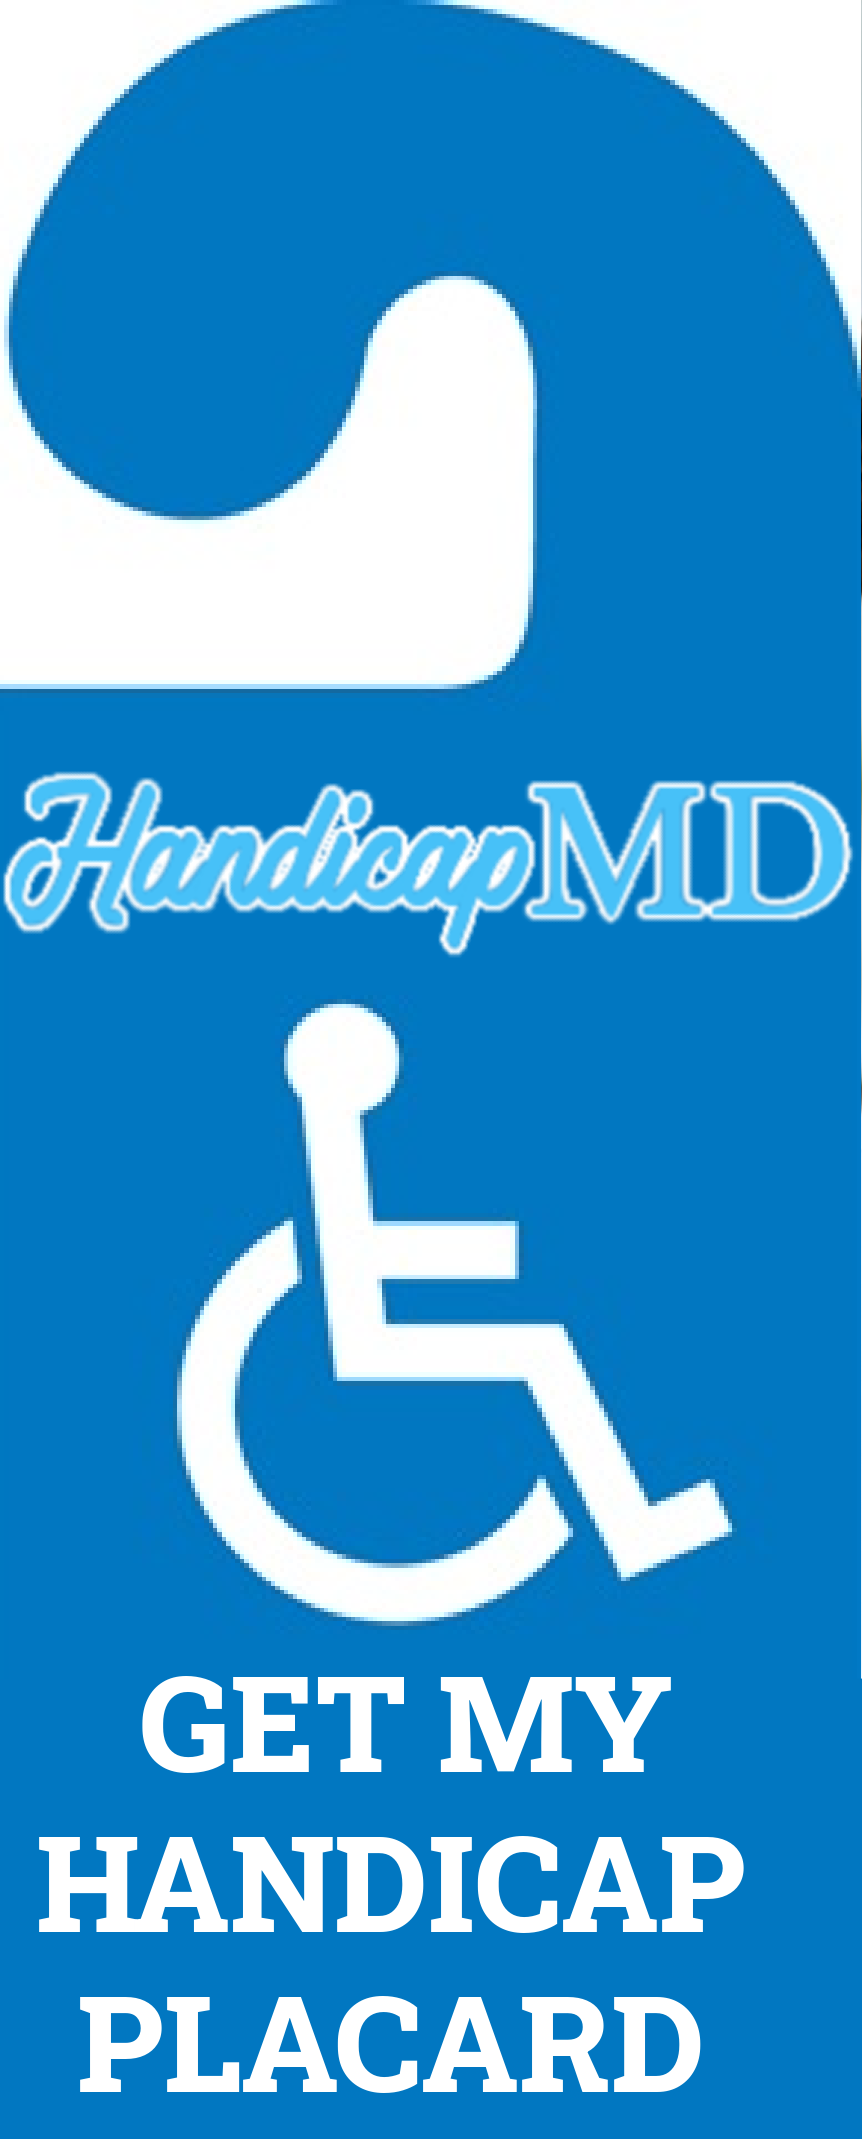 How To Get A Handicap Parking Placard Renewal in Texas